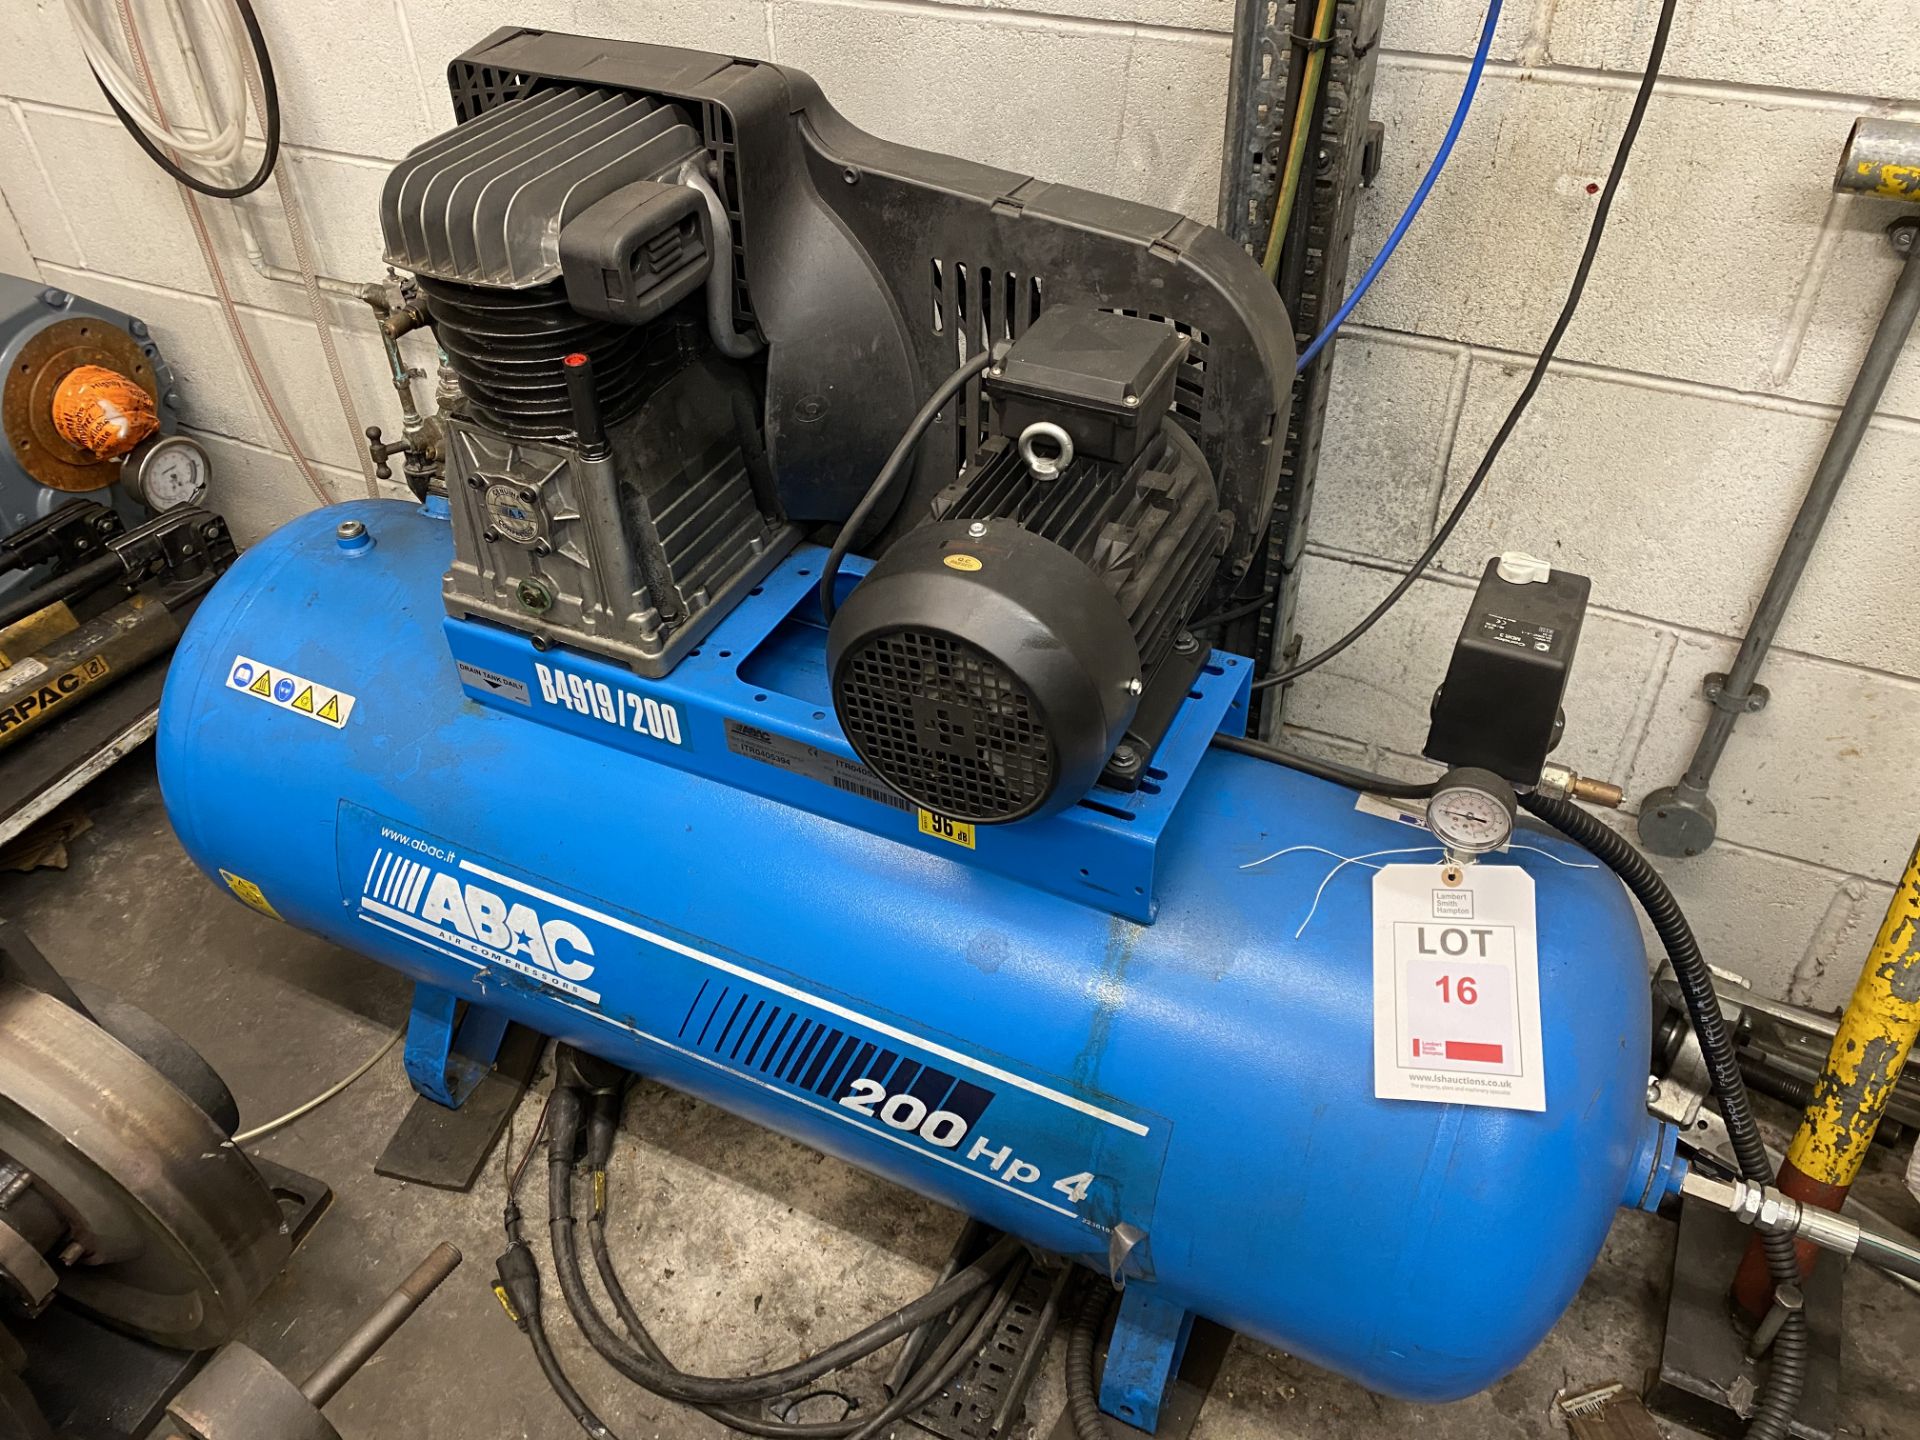 Abac B4919/200 200HP receiver mounted air compressor, Serial no. 9351. NB: The purchaser must ensure